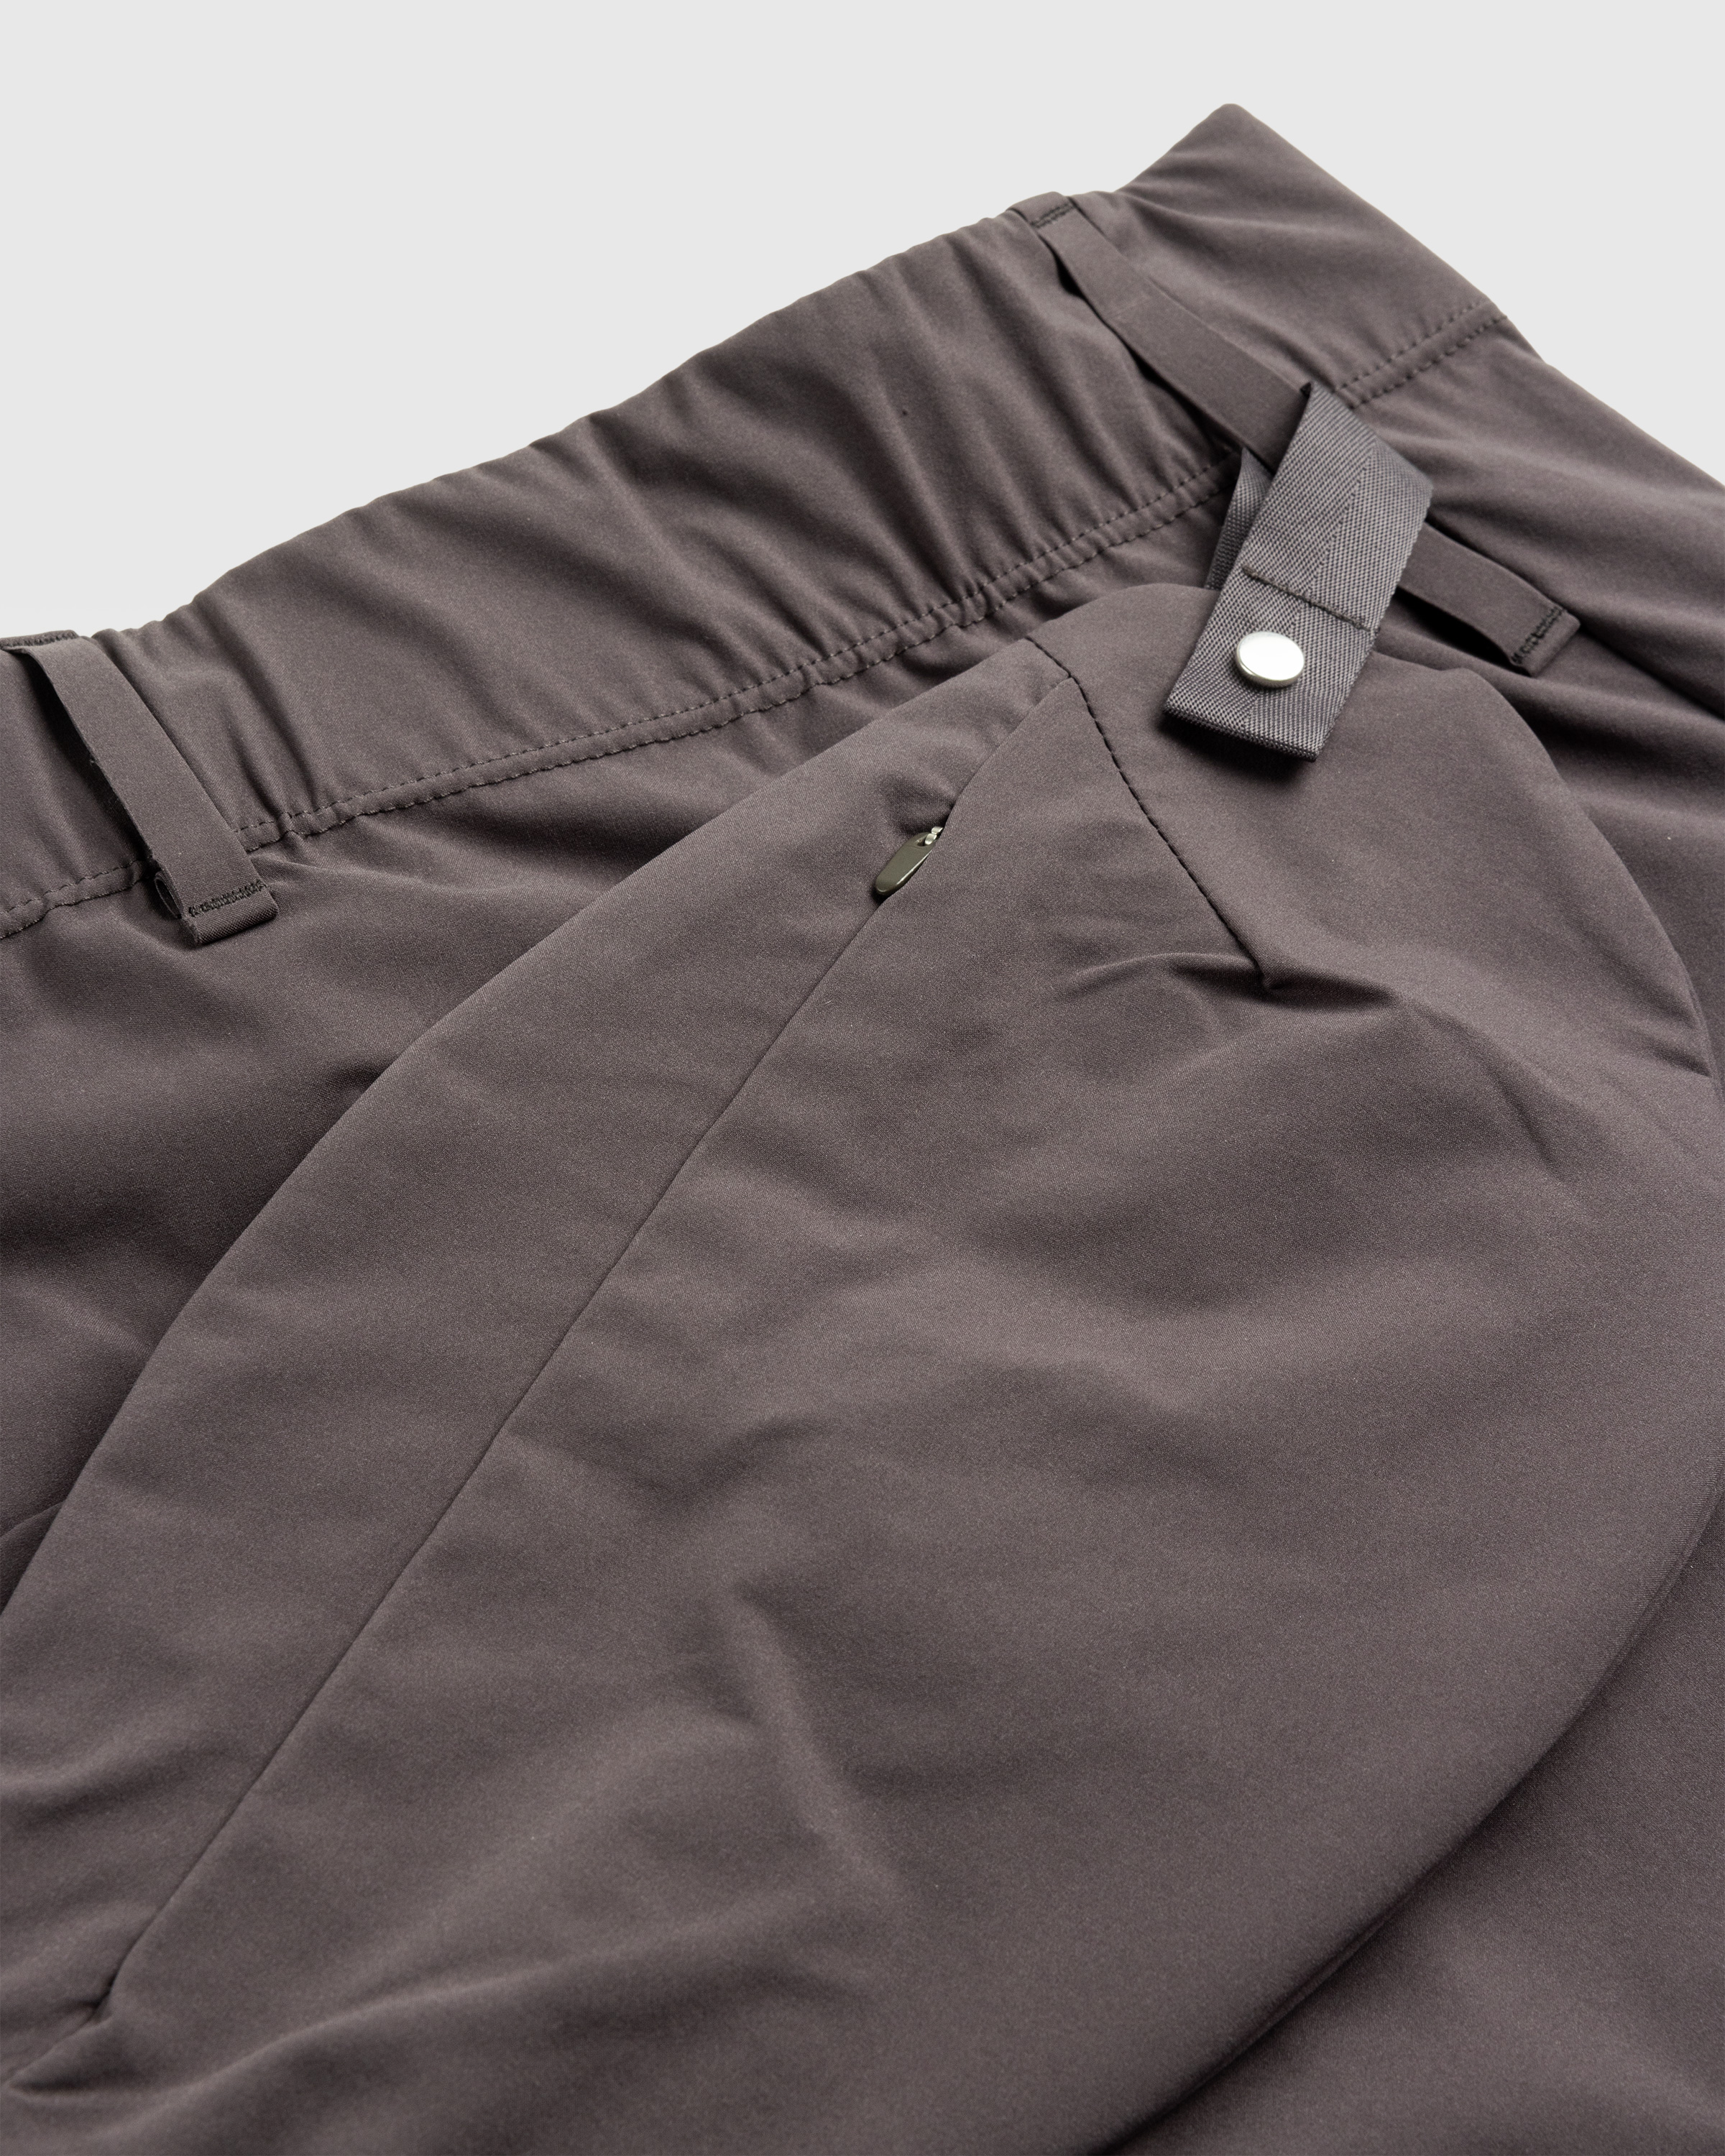 Post Archive Faction (PAF) – 6.0 Technical Pants Right Brown - Trousers - Brown - Image 8